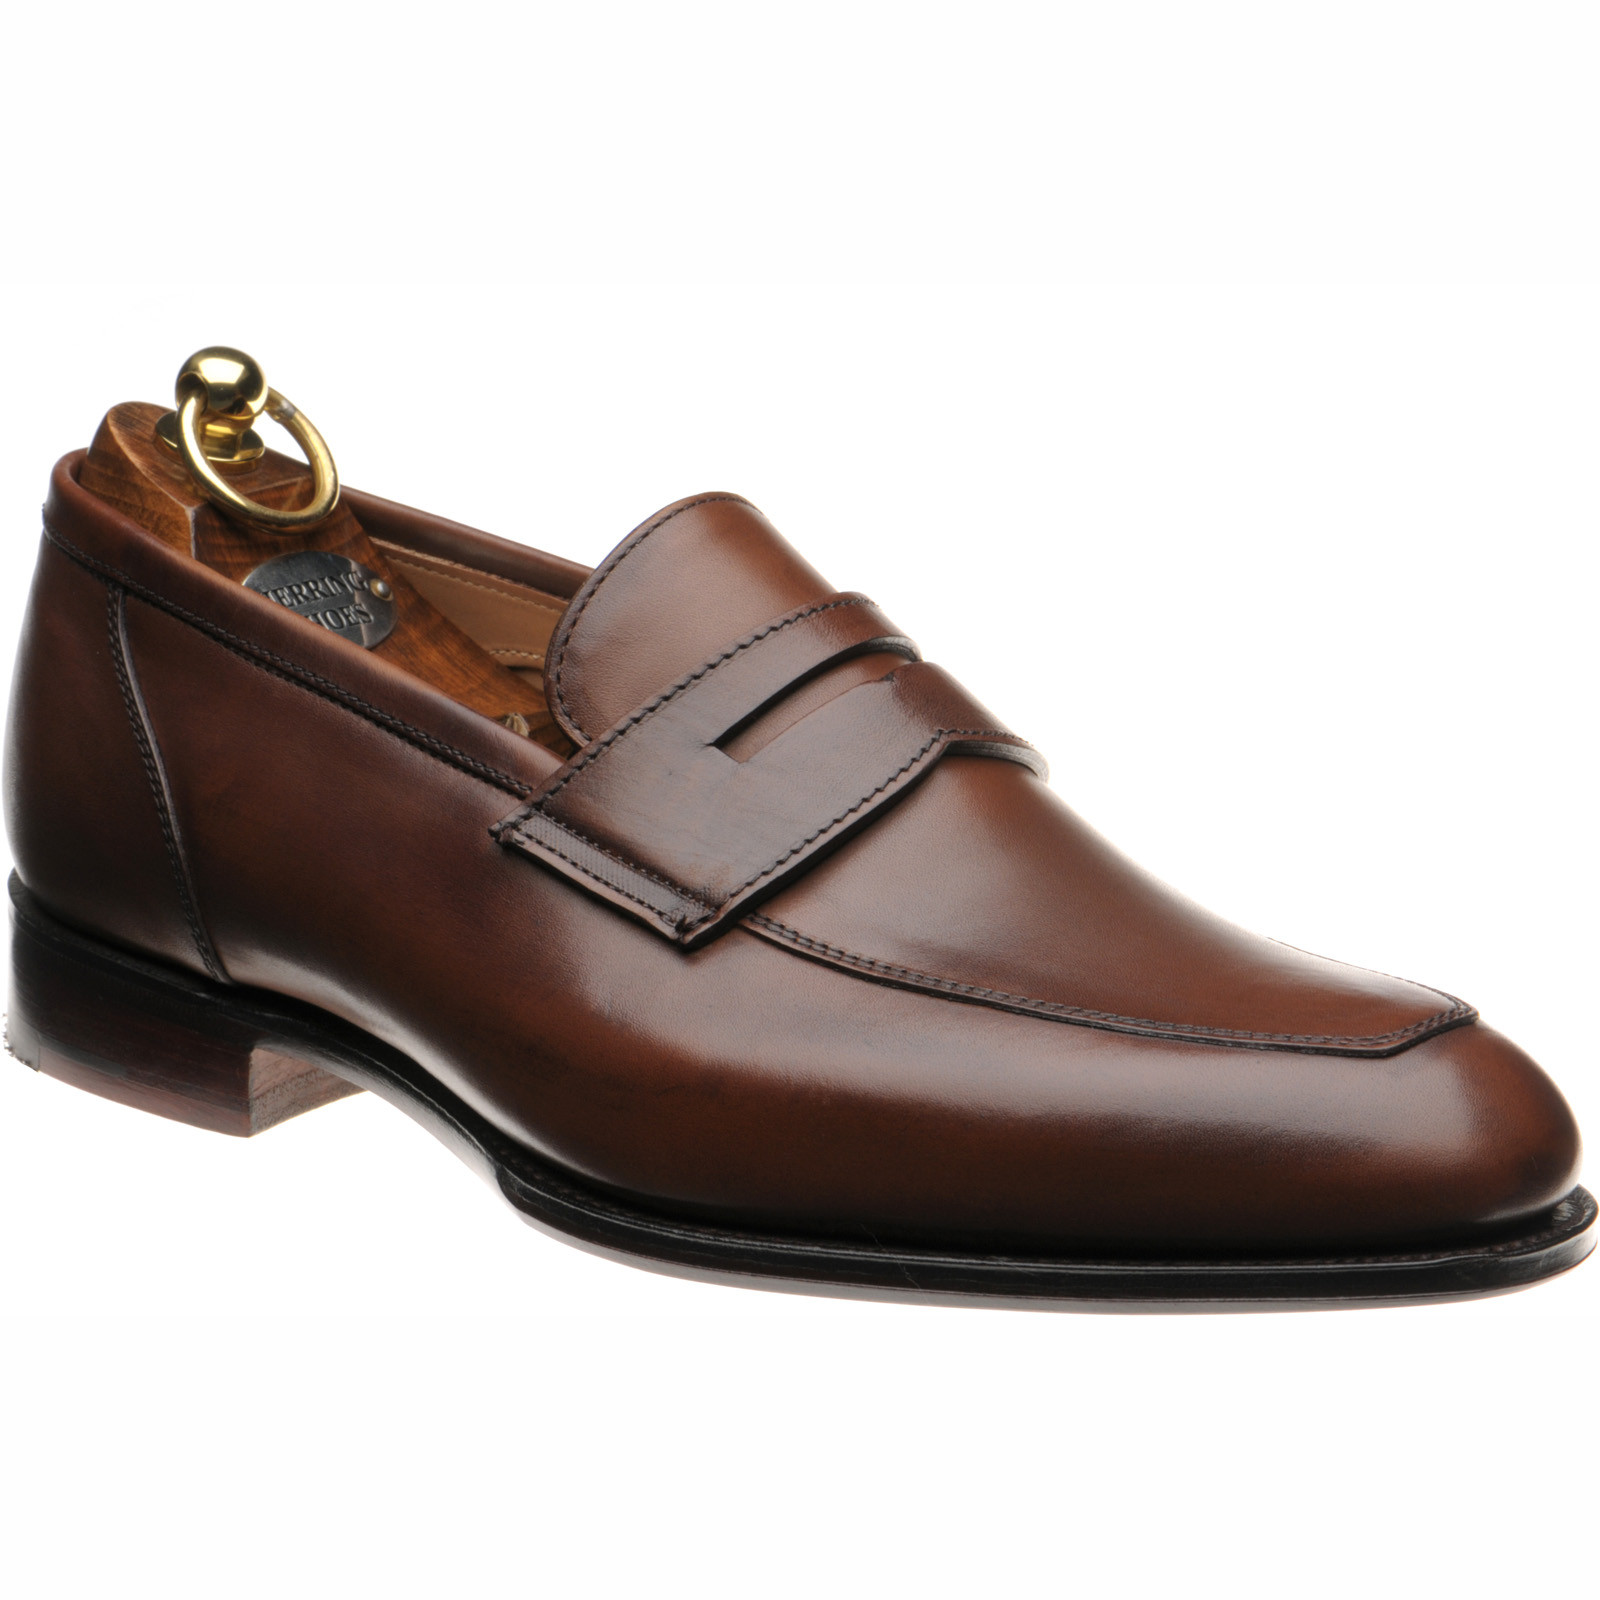 Herring shoes | Herring Premier | James loafers in Espresso Calf at ...